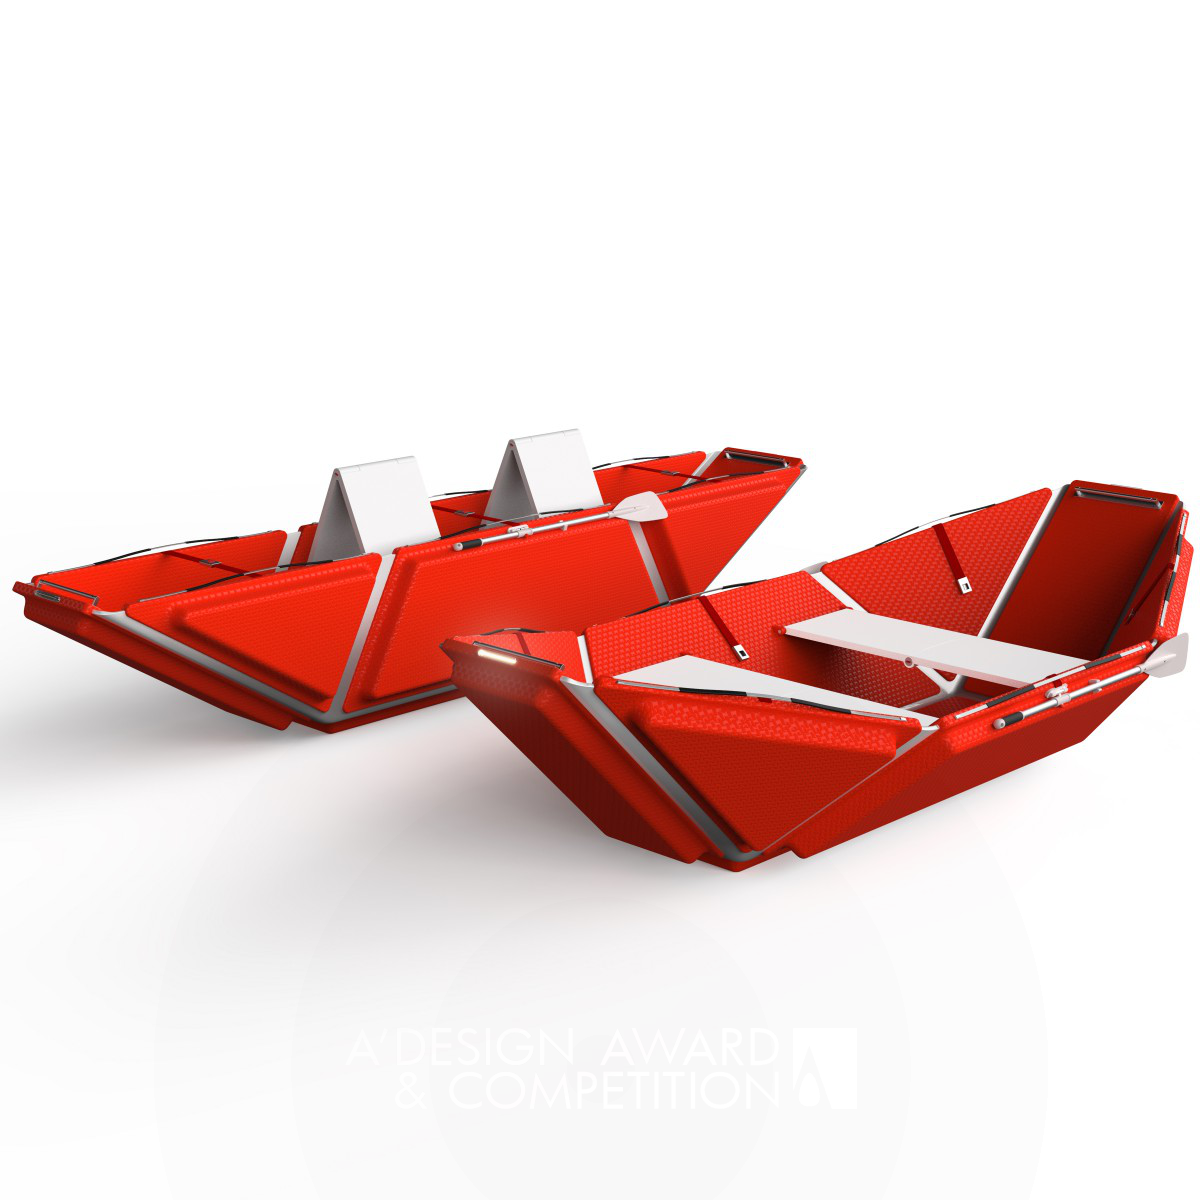 Paper Folding Lifeboat Design by Yining Chen